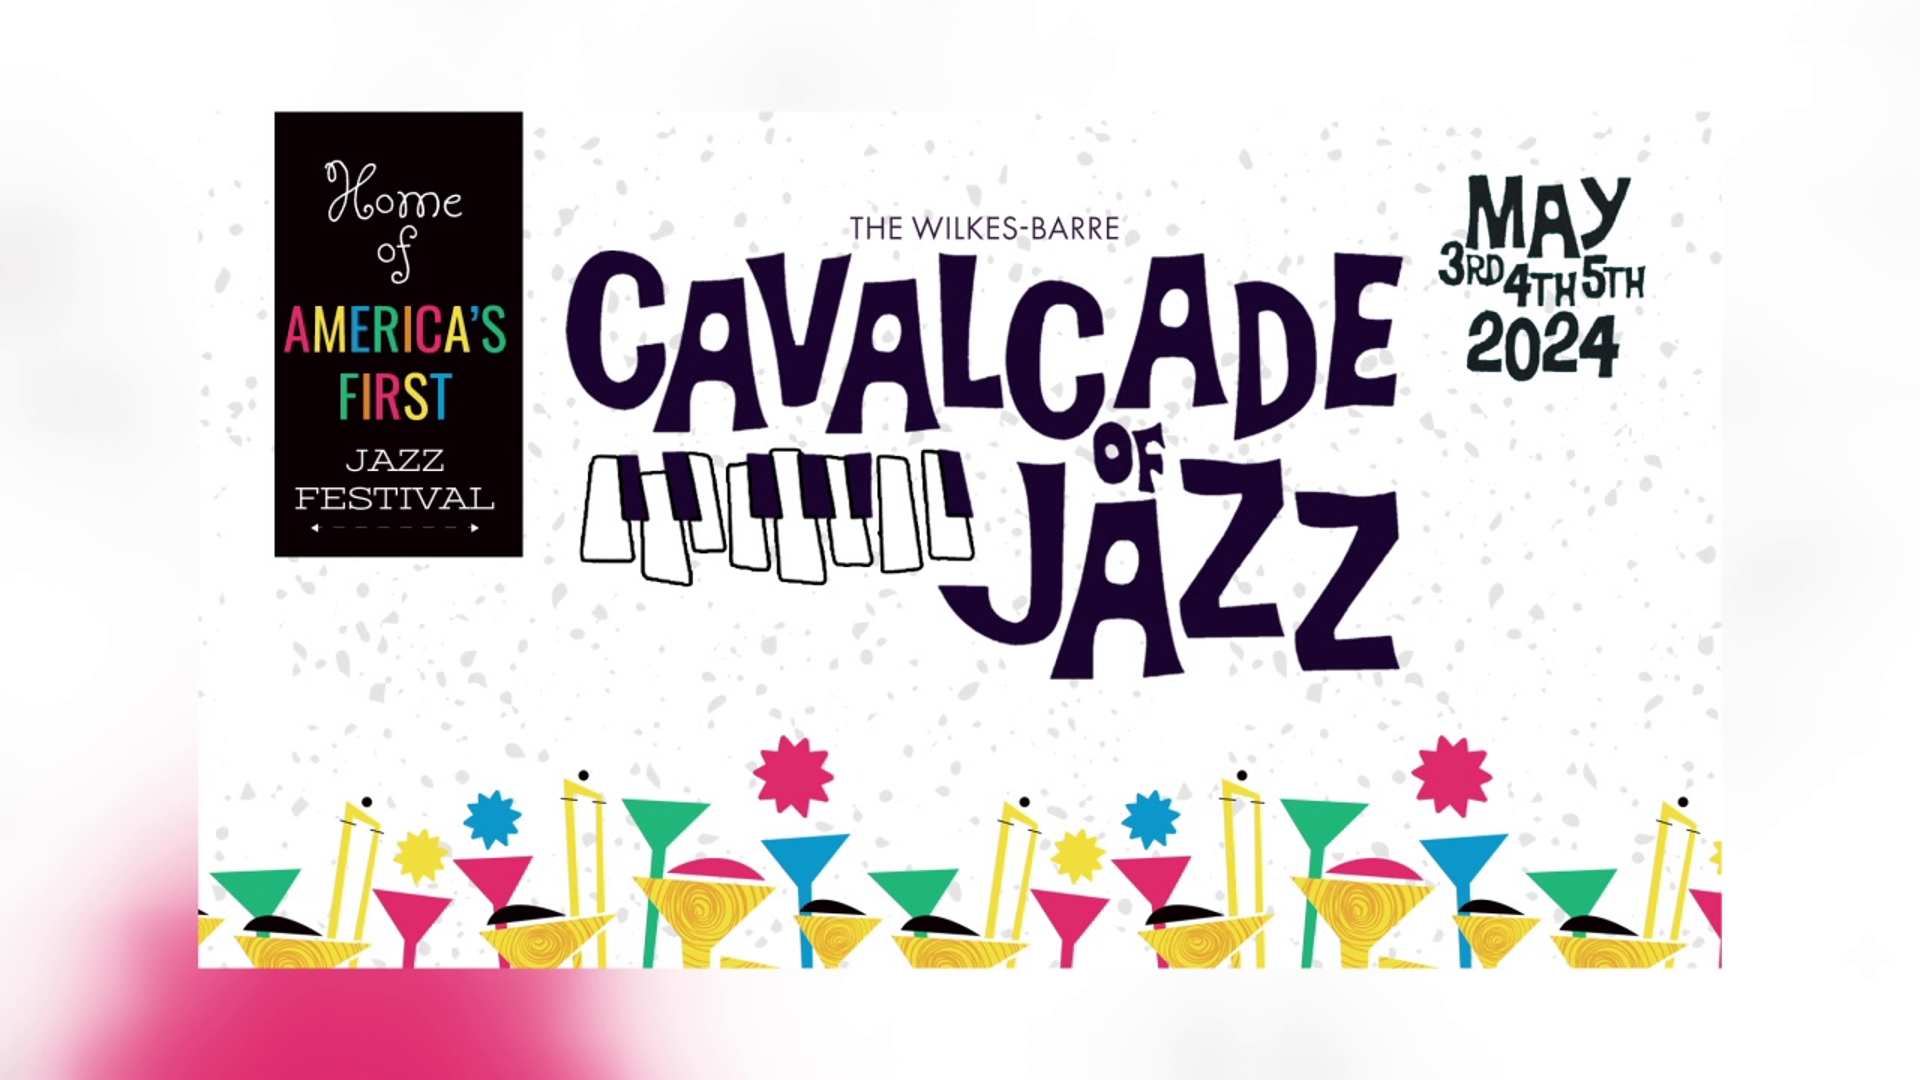 The Wilkes Barre "Cavalcade of Jazz" comes to downtown Wilkes-Barre on May 3 through May 5, bringing a focus to restaurants, coffee houses and bars.